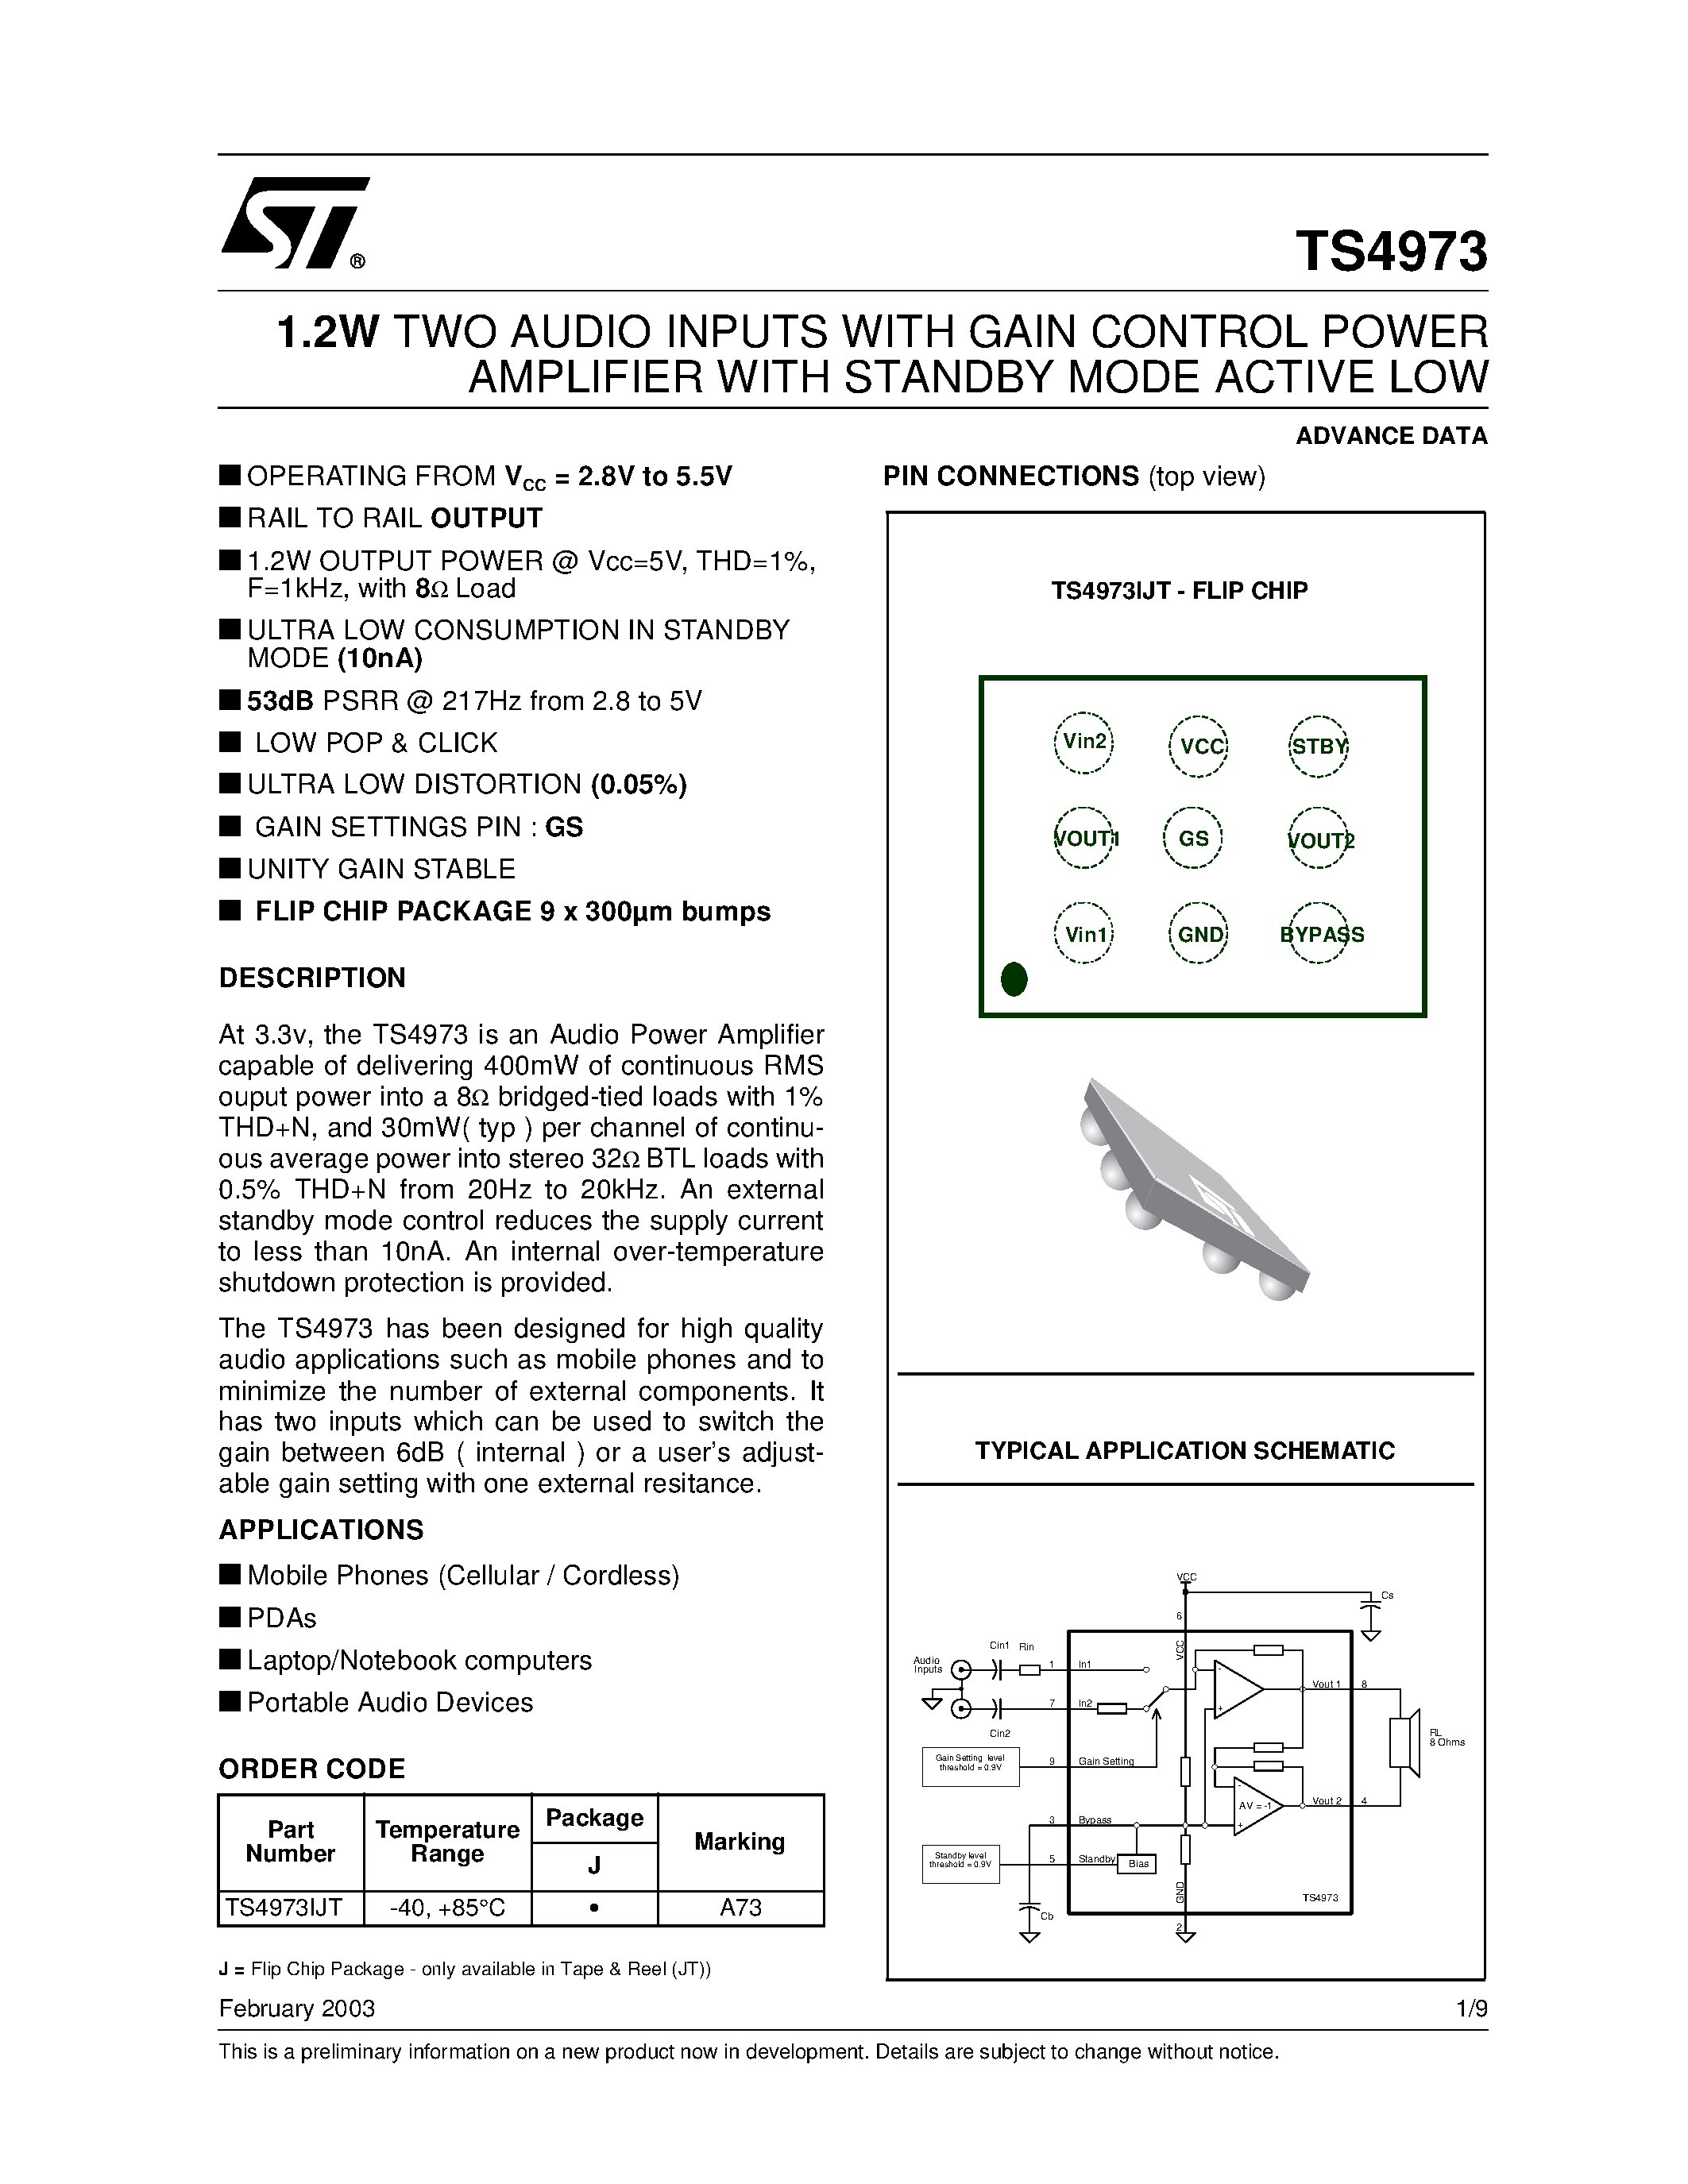 Datasheet TS4973 - 1.2W TWO AUDIO INPUTS WITH GAIN CONTROL POWER AMPLIFIER WITH STANDBY MODE ACTIVE LOW page 1